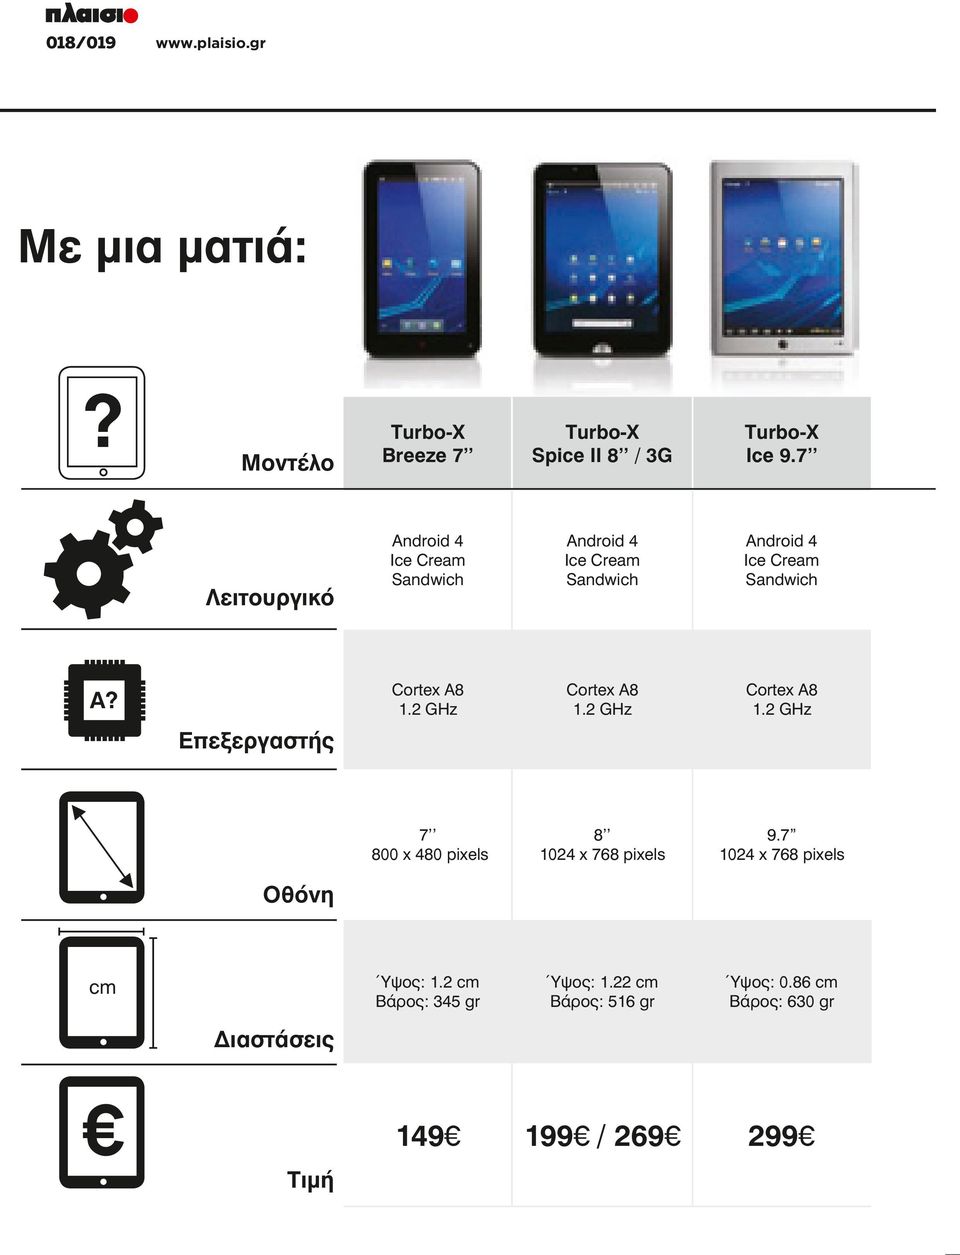 7 Android 4 Ice Cream Sandwich Android 4 Ice Cream Sandwich Android 4 Ice Cream Sandwich Cortex A8 1.2 GHz Cortex A8 1.